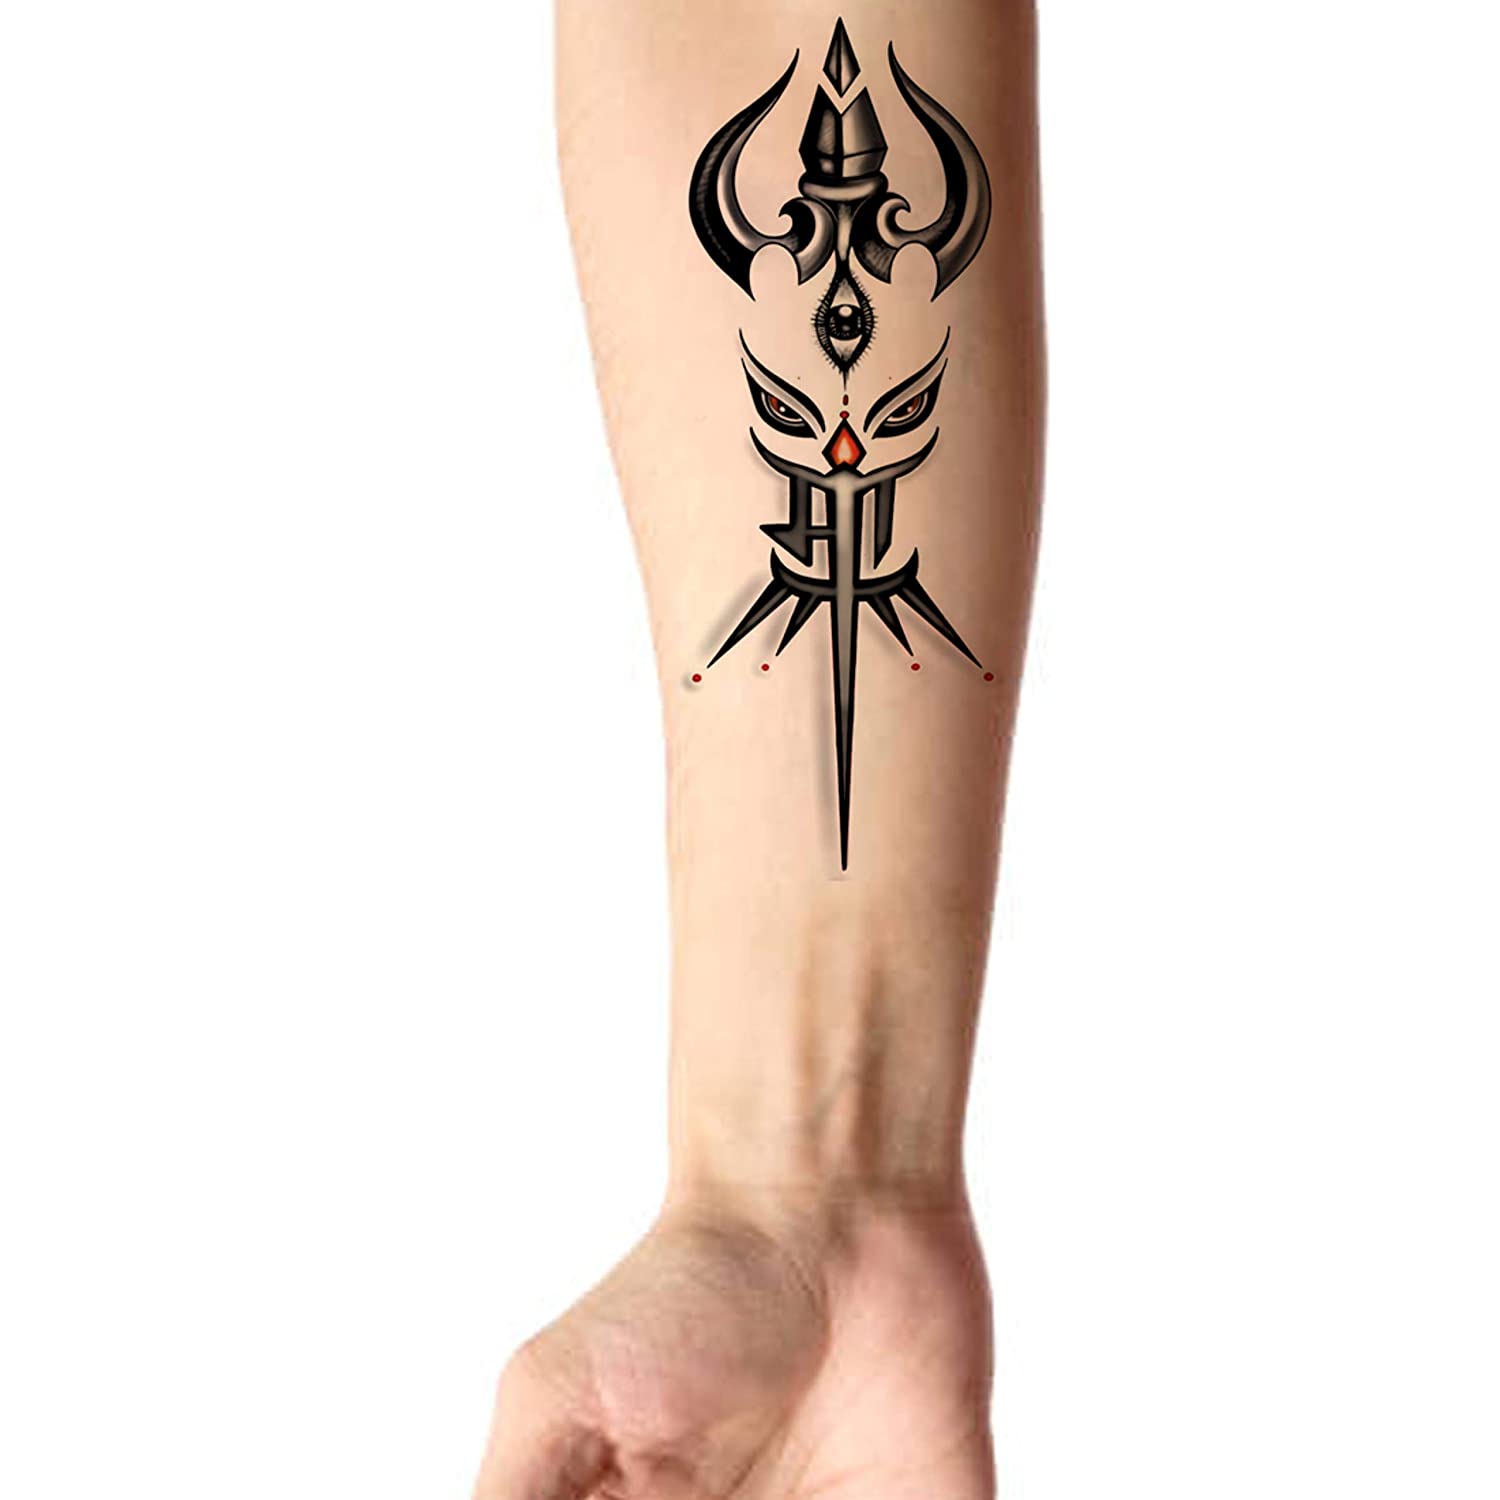 Shiva Tattoo: Design, Meaning, and Cost | 874-580-1112 Call Now